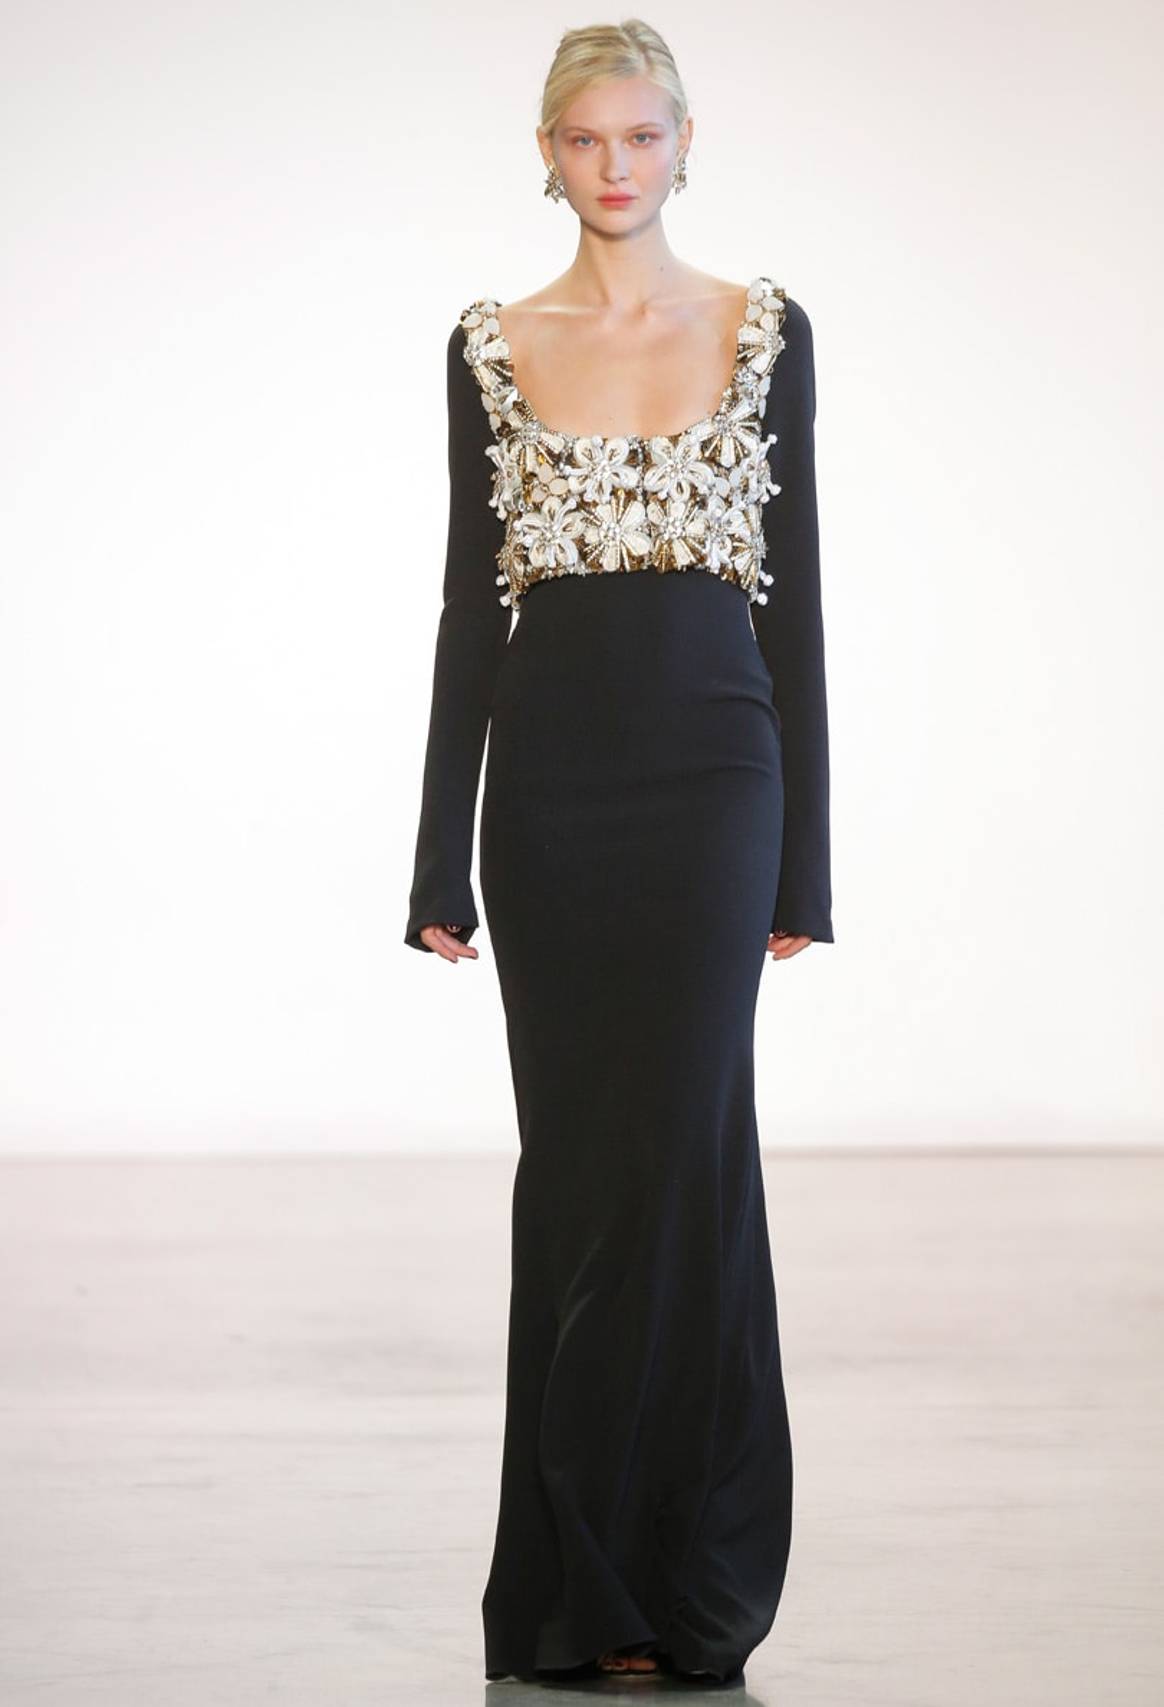 Evening wear is not dead according to Badgley Mischka and Naeem Khan